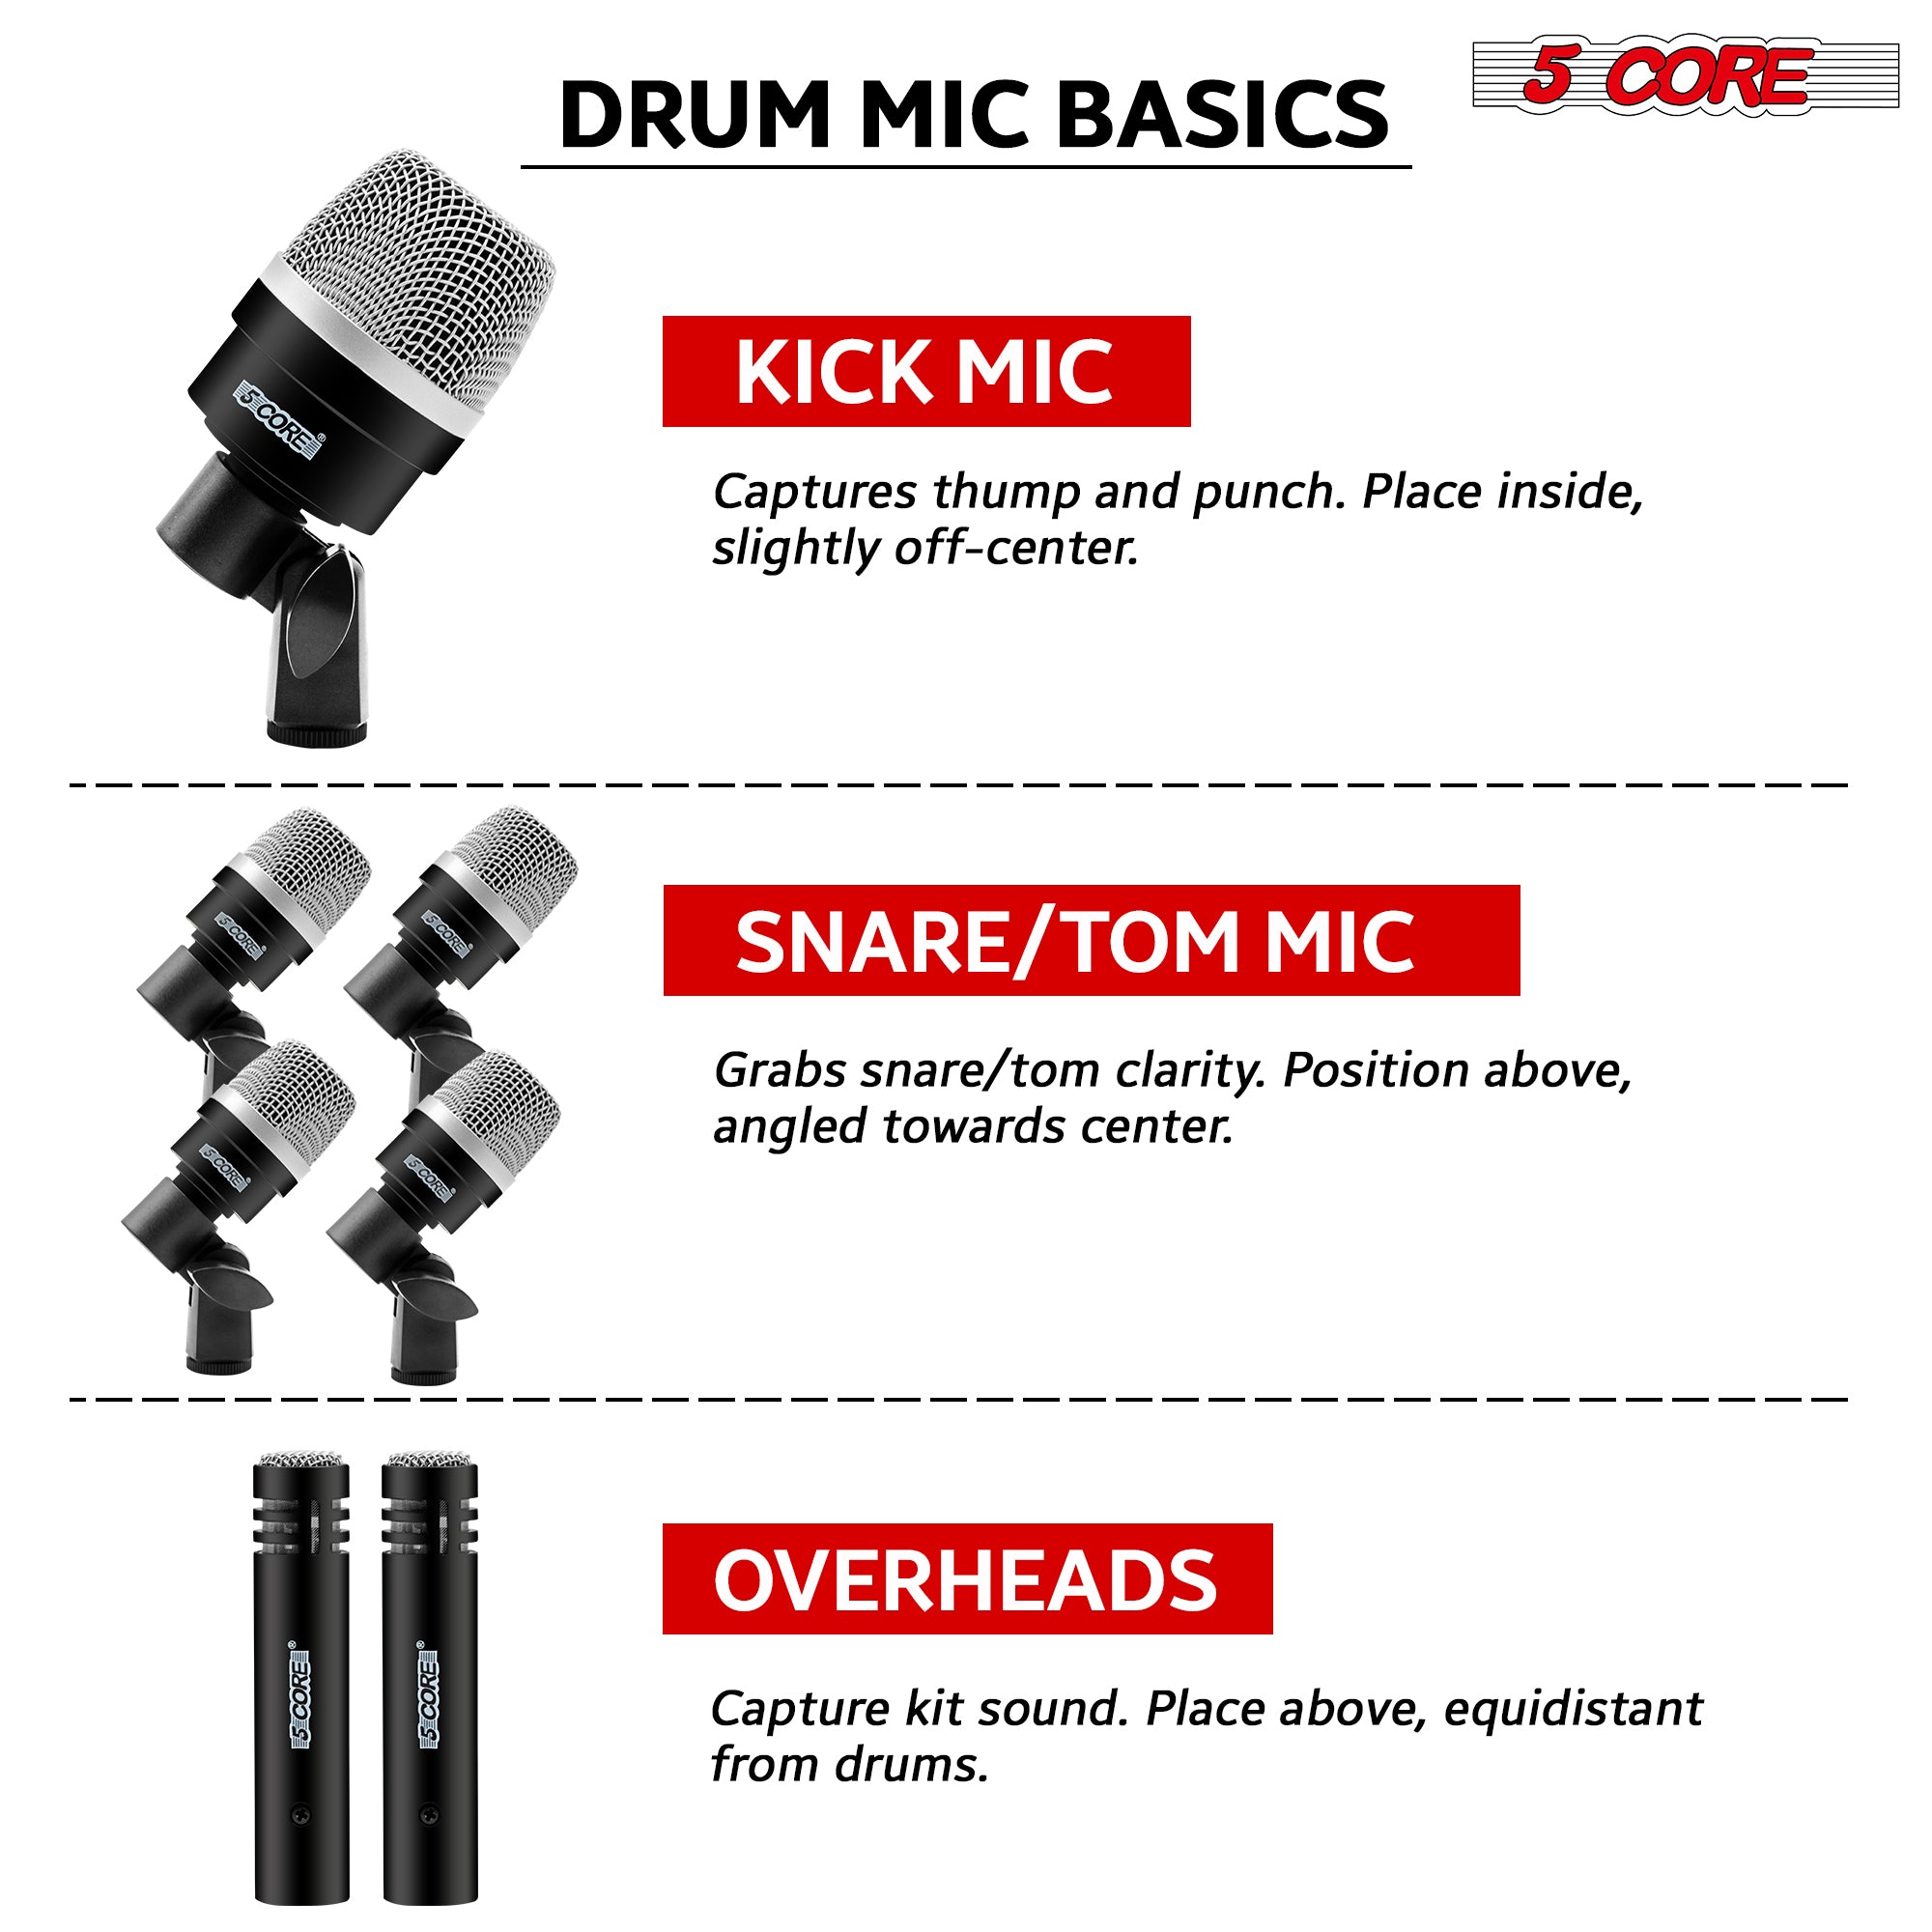 Dynamic XLR microphone set providing the essential tools for drum sound reinforcement.